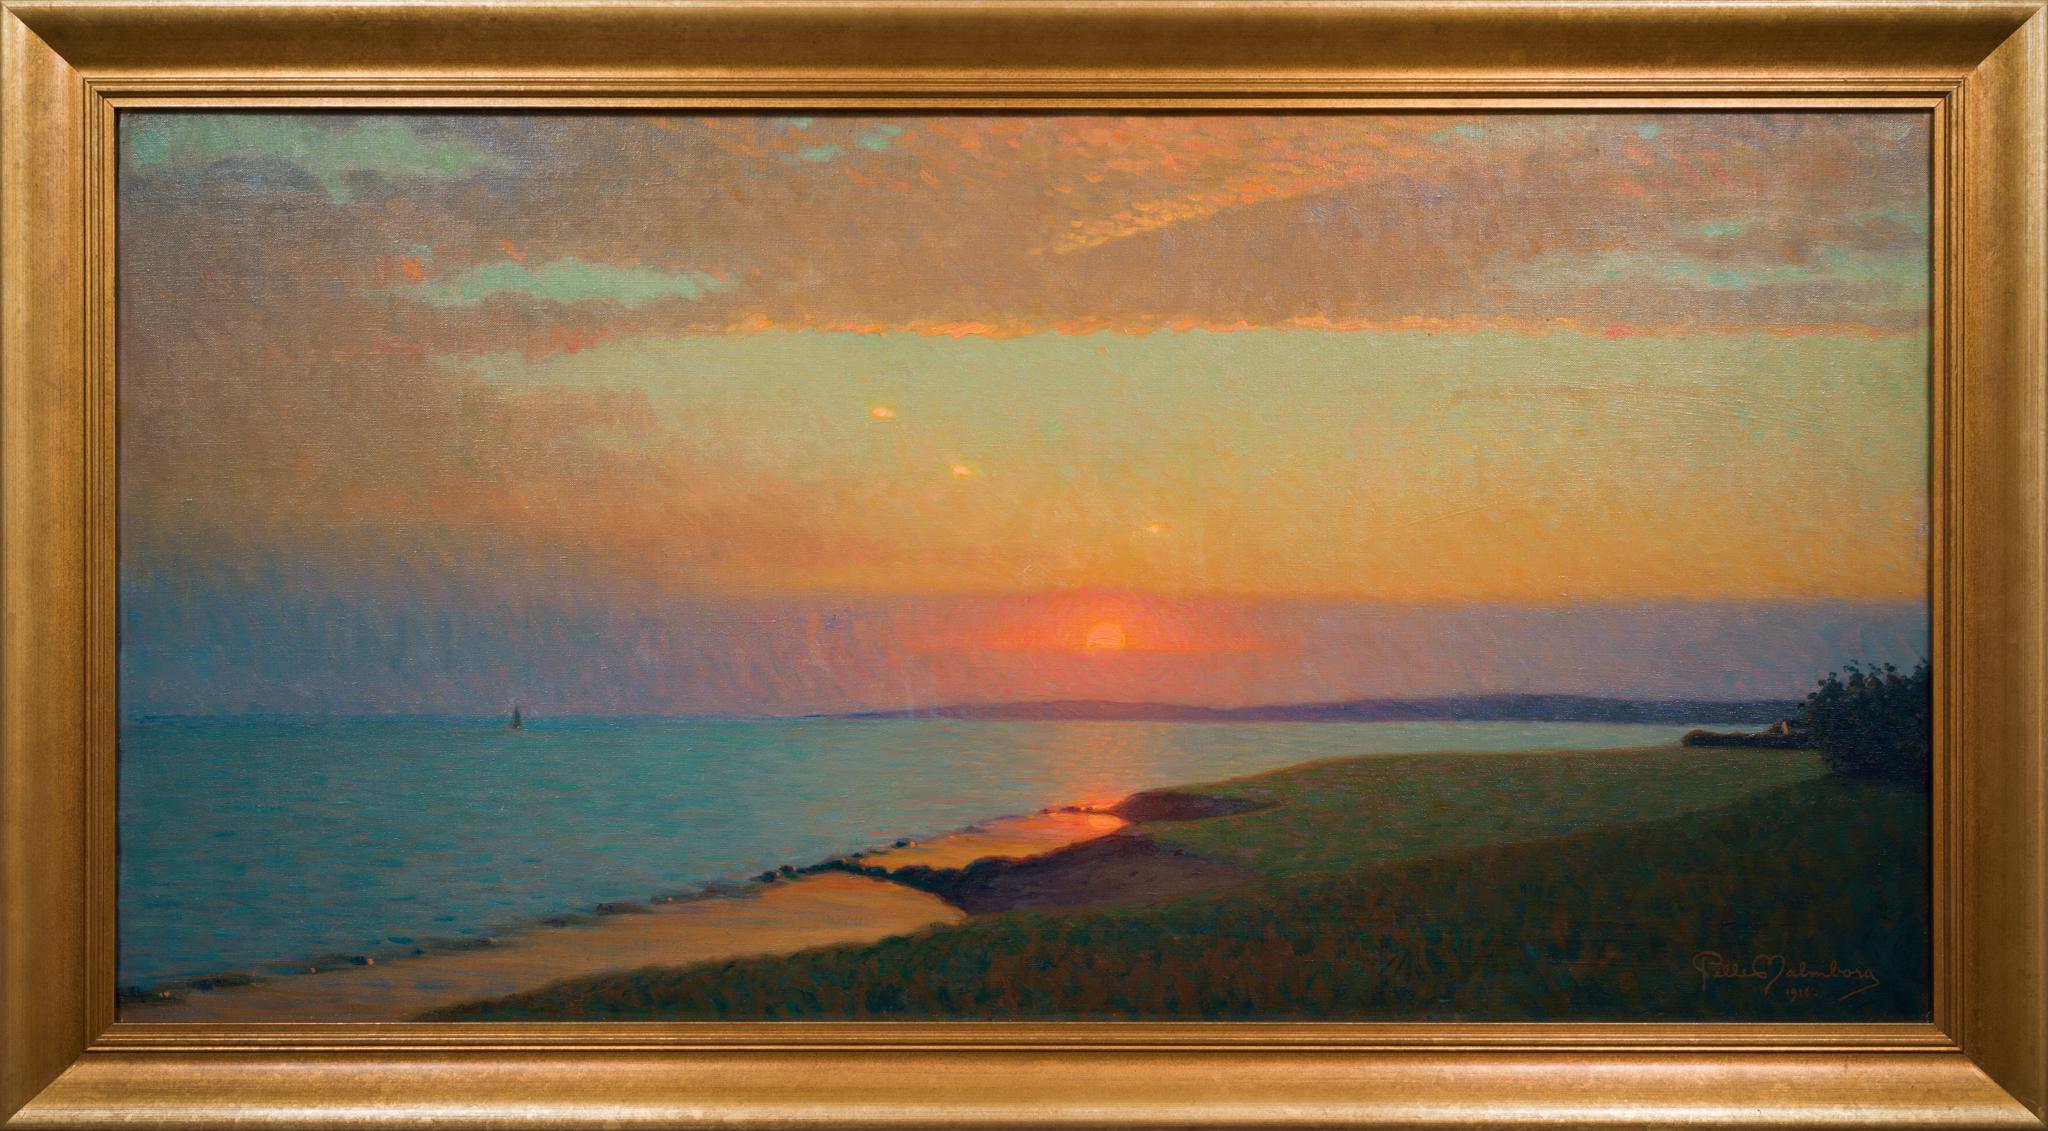 The painting "Skälderviken at Sunset" by Pelle Malmborg, a renowned Swedish painter and graphic artist, is an exquisite depiction of serenity and natural splendour. He studied at the Technical School in Stockholm and later at the Royal Swedish